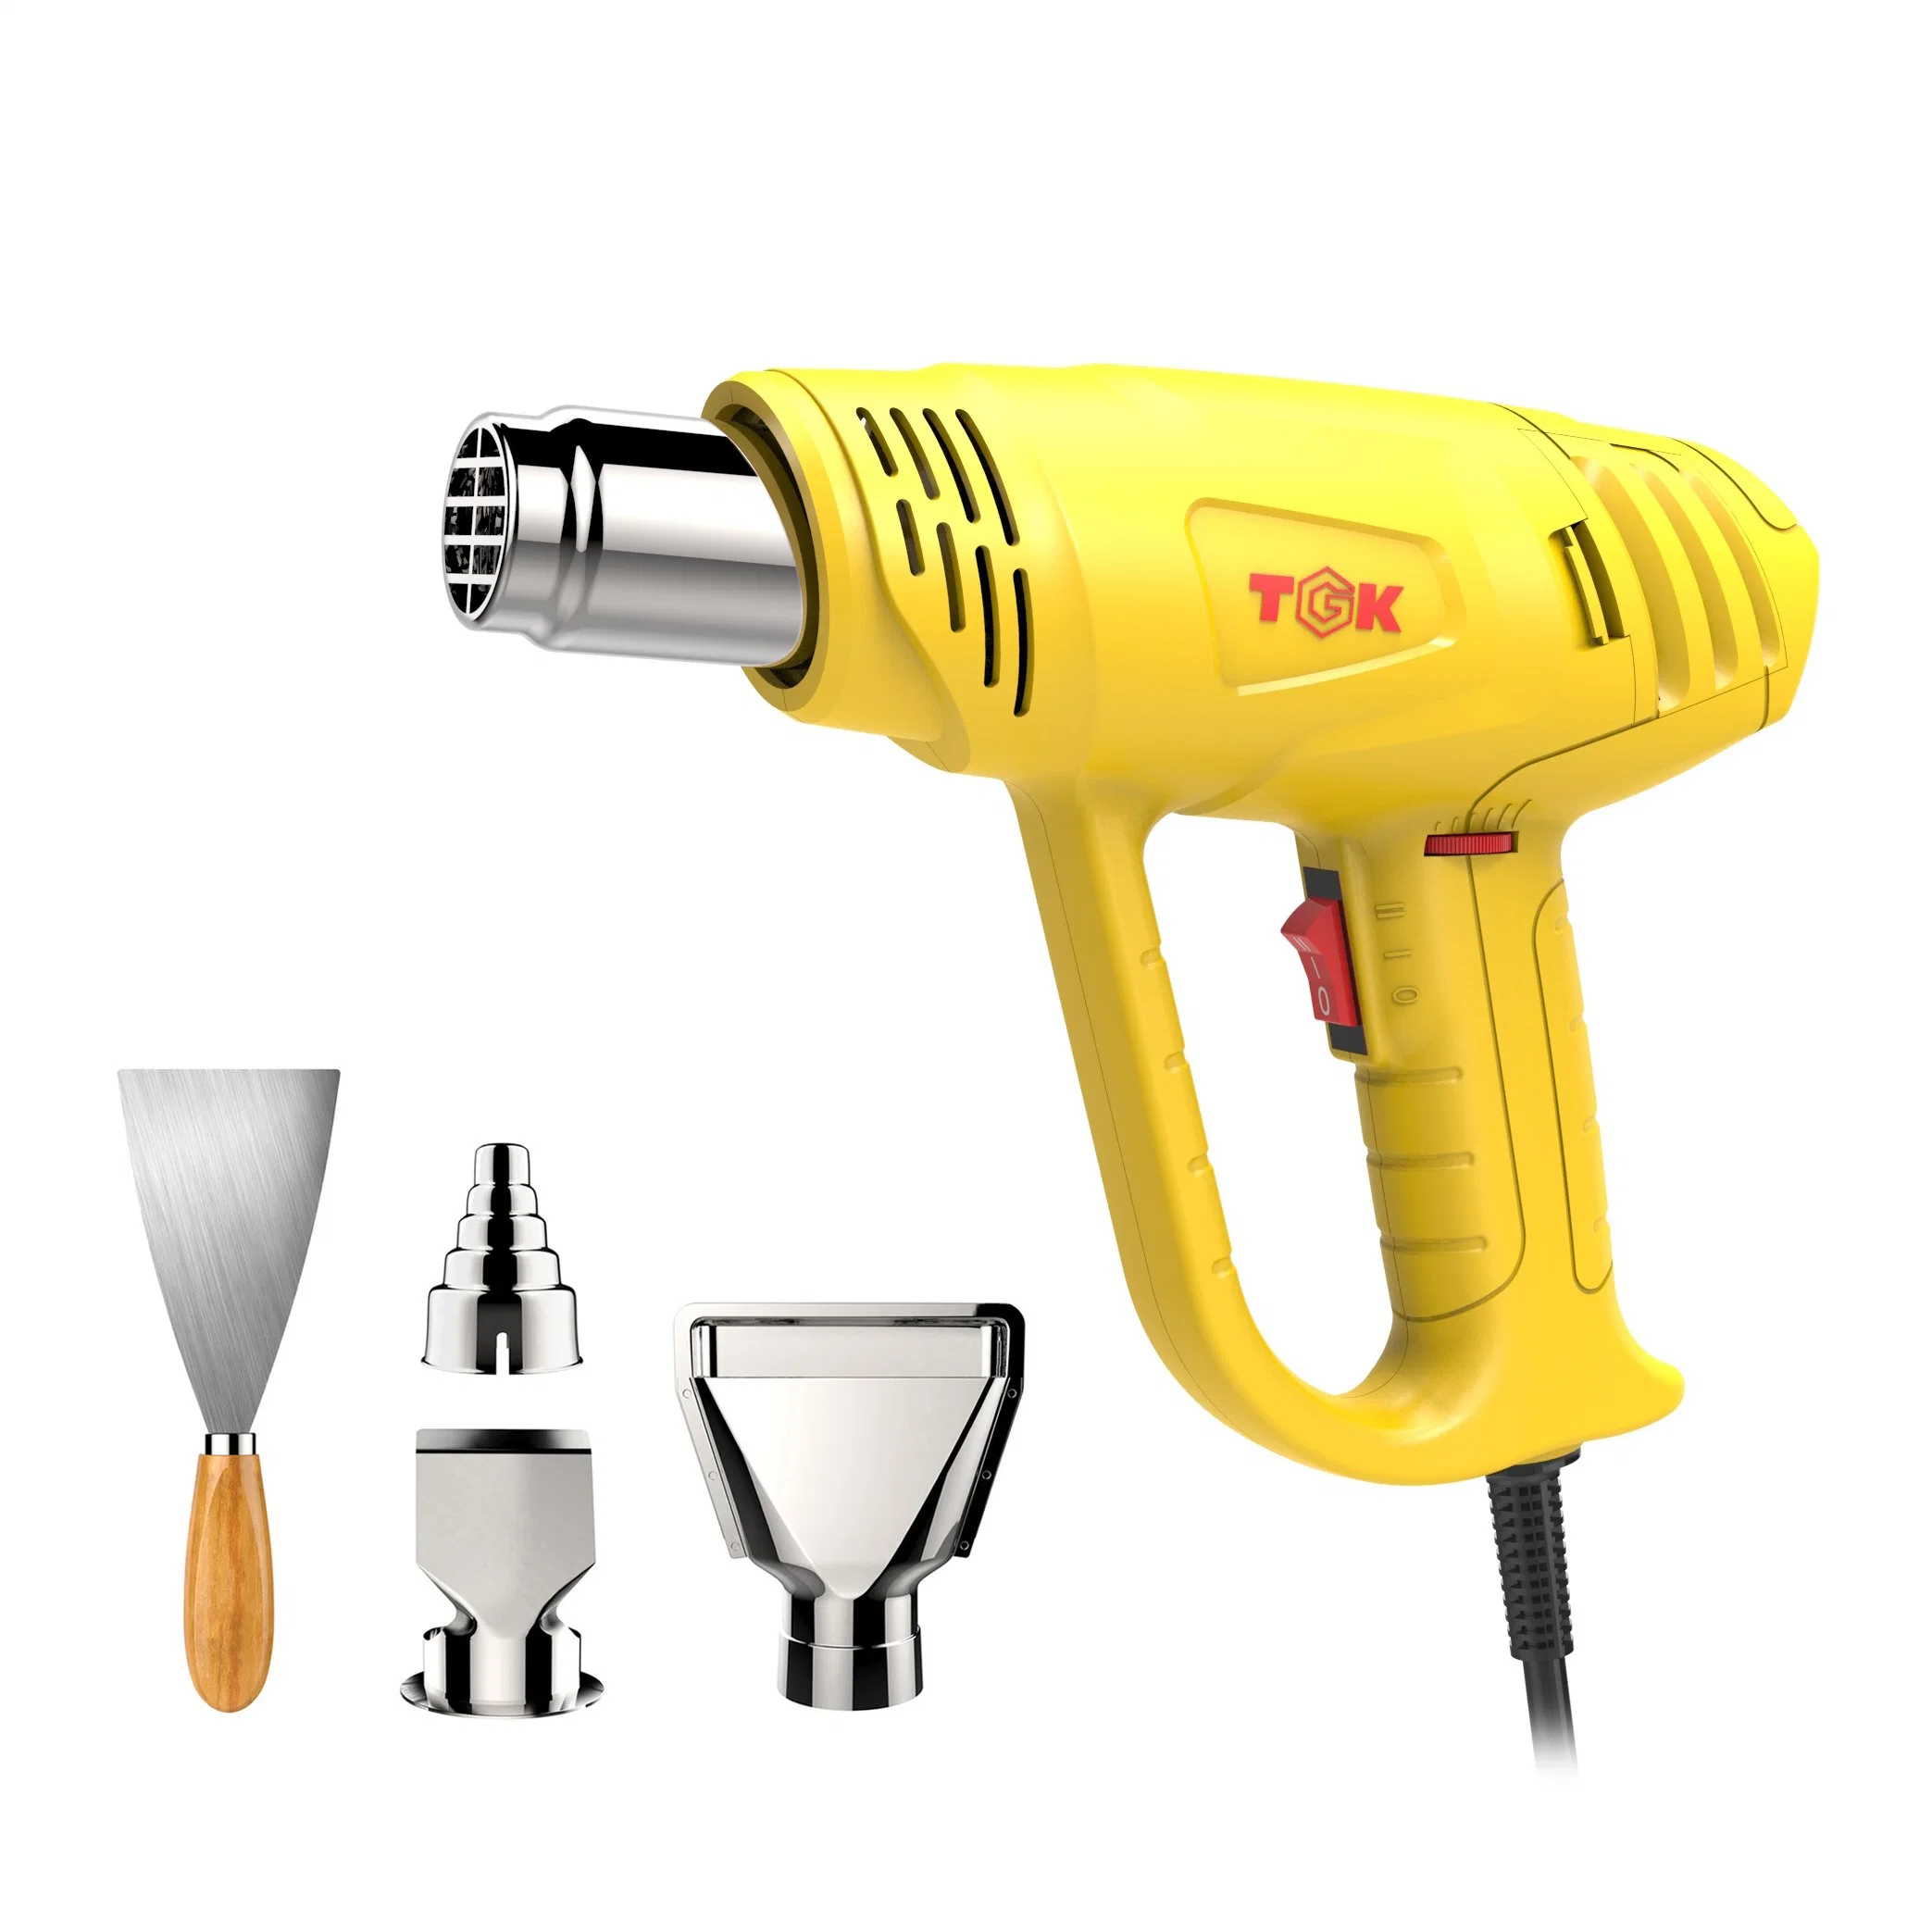 Portable Heat Gun to Help Remove Decals and Window Tint Hg5520